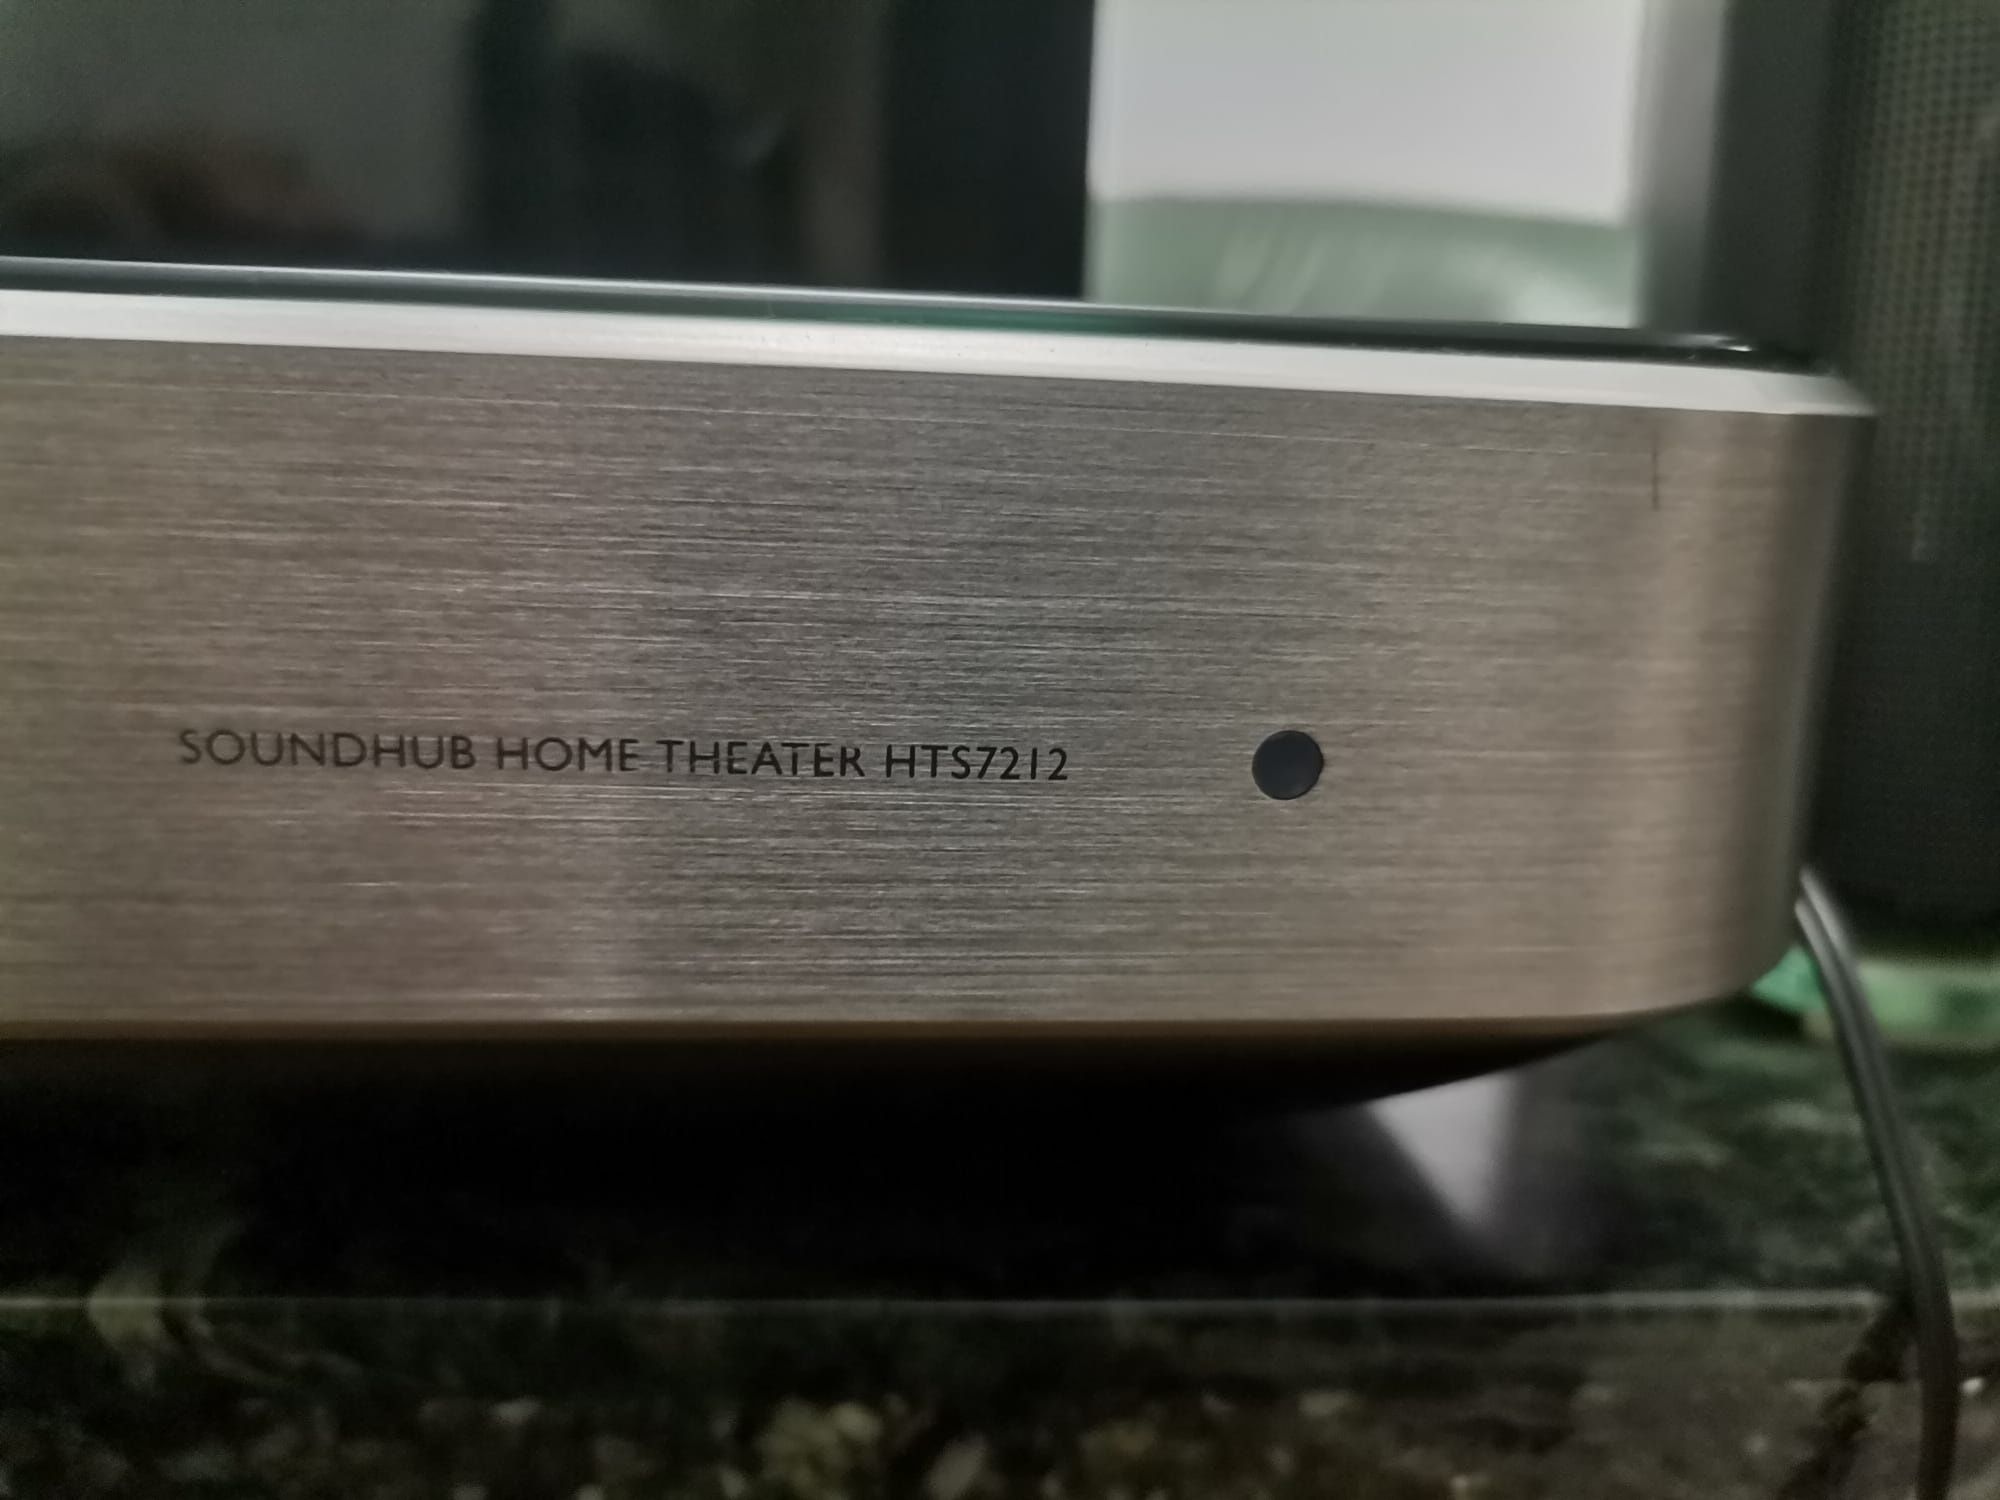 Philips soundhub home theater HTS 7212